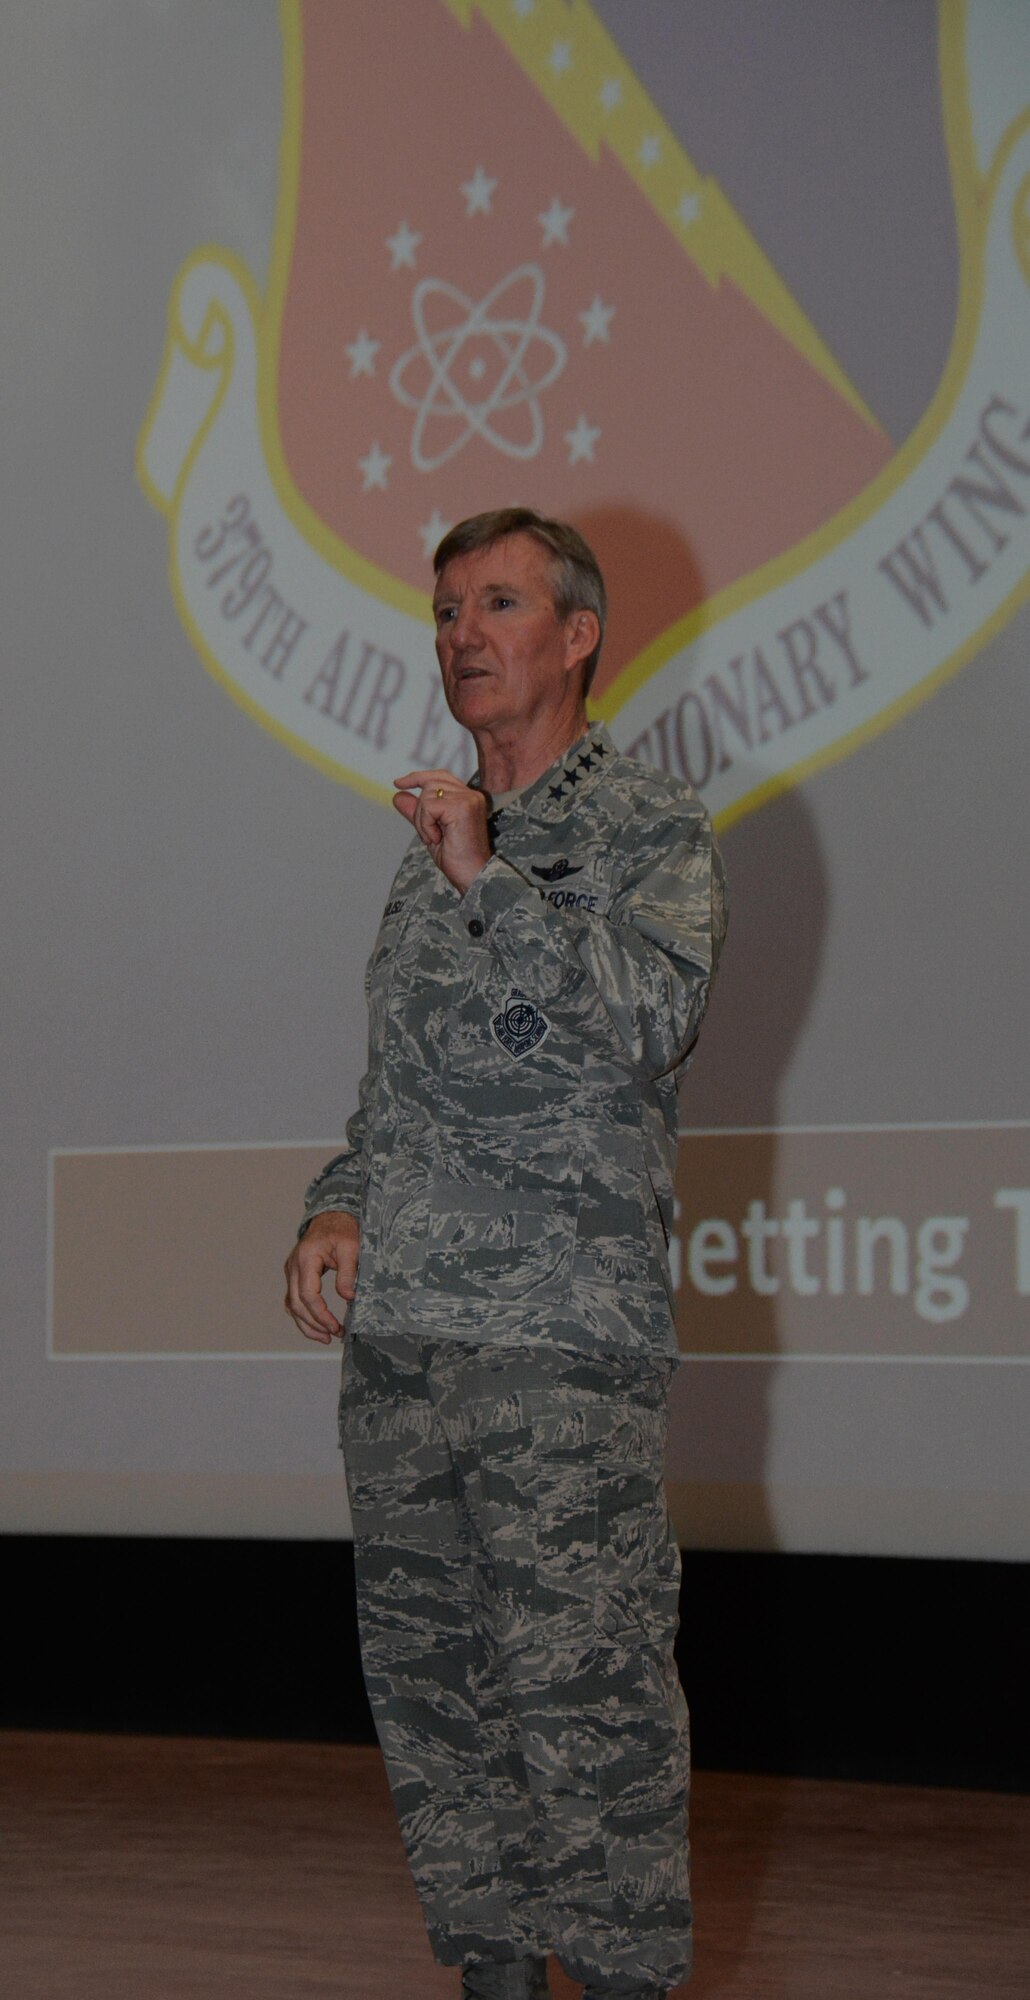 U.S. Air Force Gen. Hawk Carlisle, commander of Air Combat Command, address more than 300 members of Al Udeid Air Base, Qatar during an all-call event at the Coalition Compound Theater Oct. 21, 2015. During the all-call, Carlisle emphasized the importance of being resilient, preventing suicide and ending sexual assault. (U.S. Air Force photo by Tech. Sgt. James Hodgman/Released)
